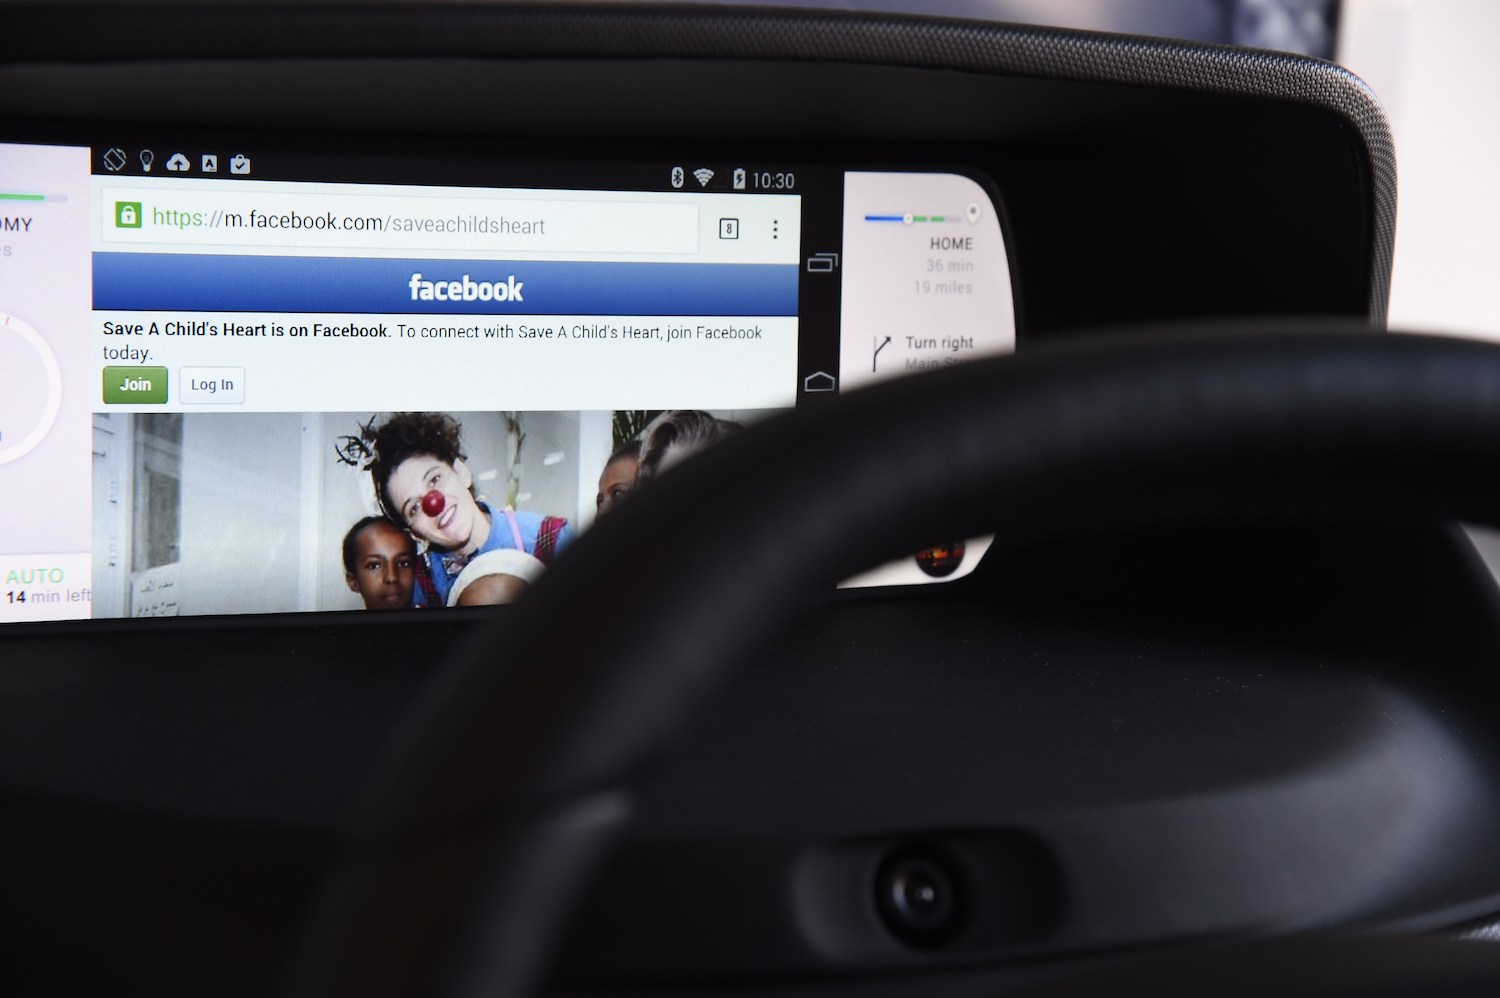 Facebook from a wirelessly connected smartphone in a car